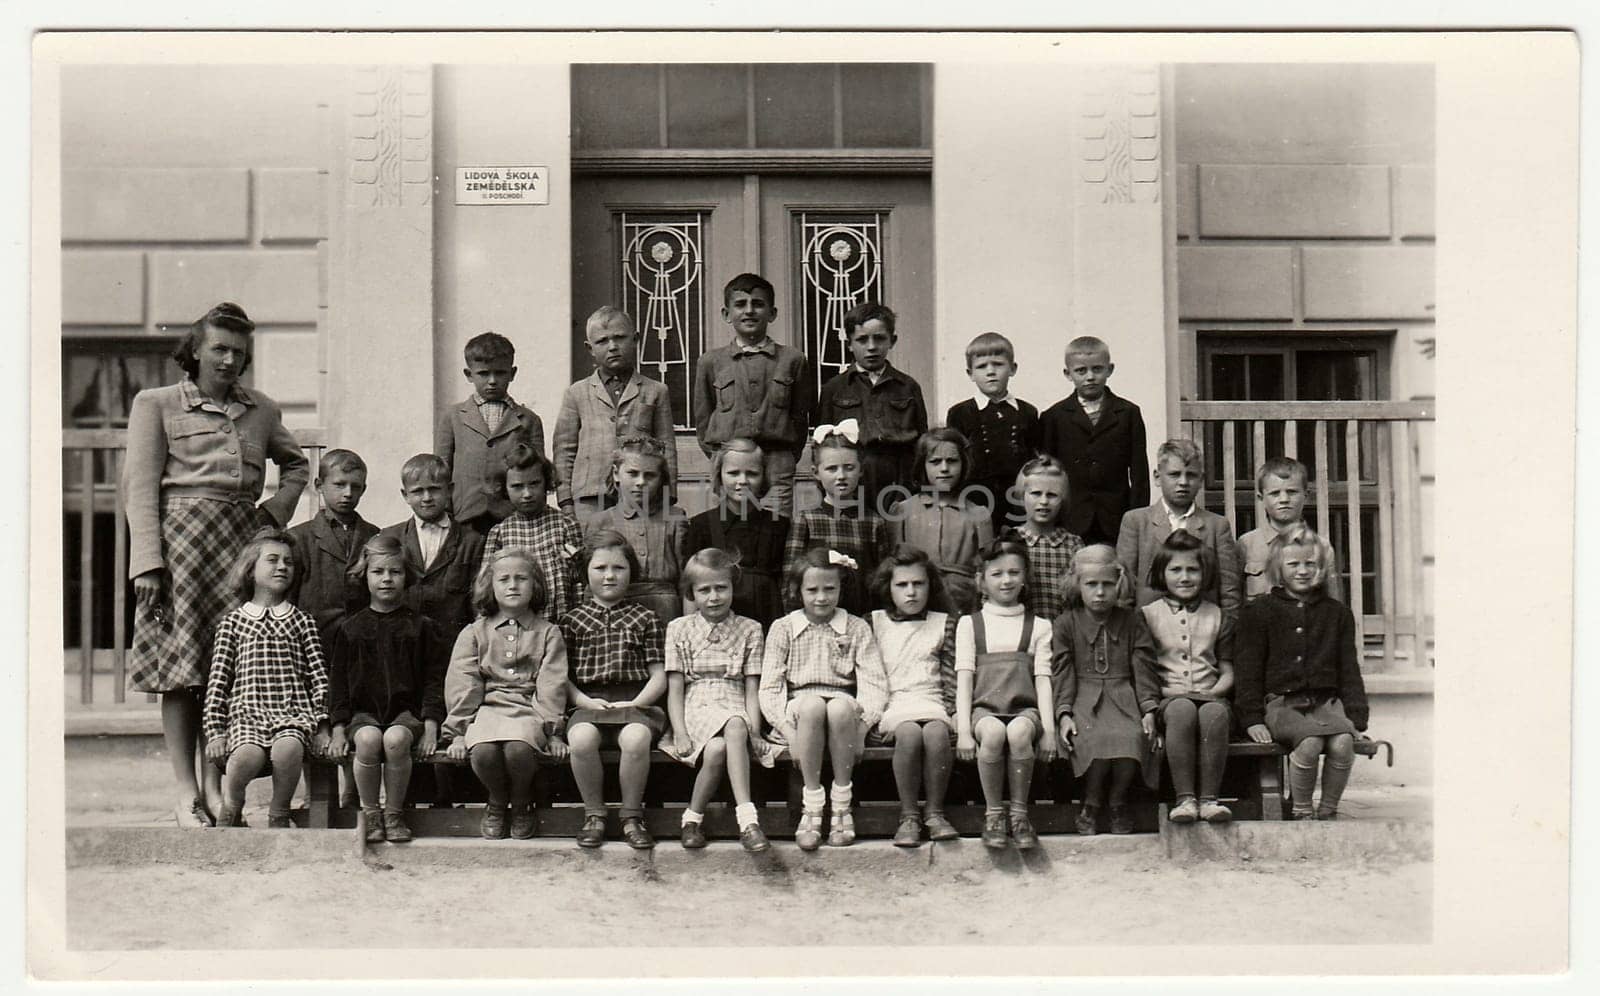 Vintage photo shows pupils (schoolmates) and their female teacher. by roman_nerud